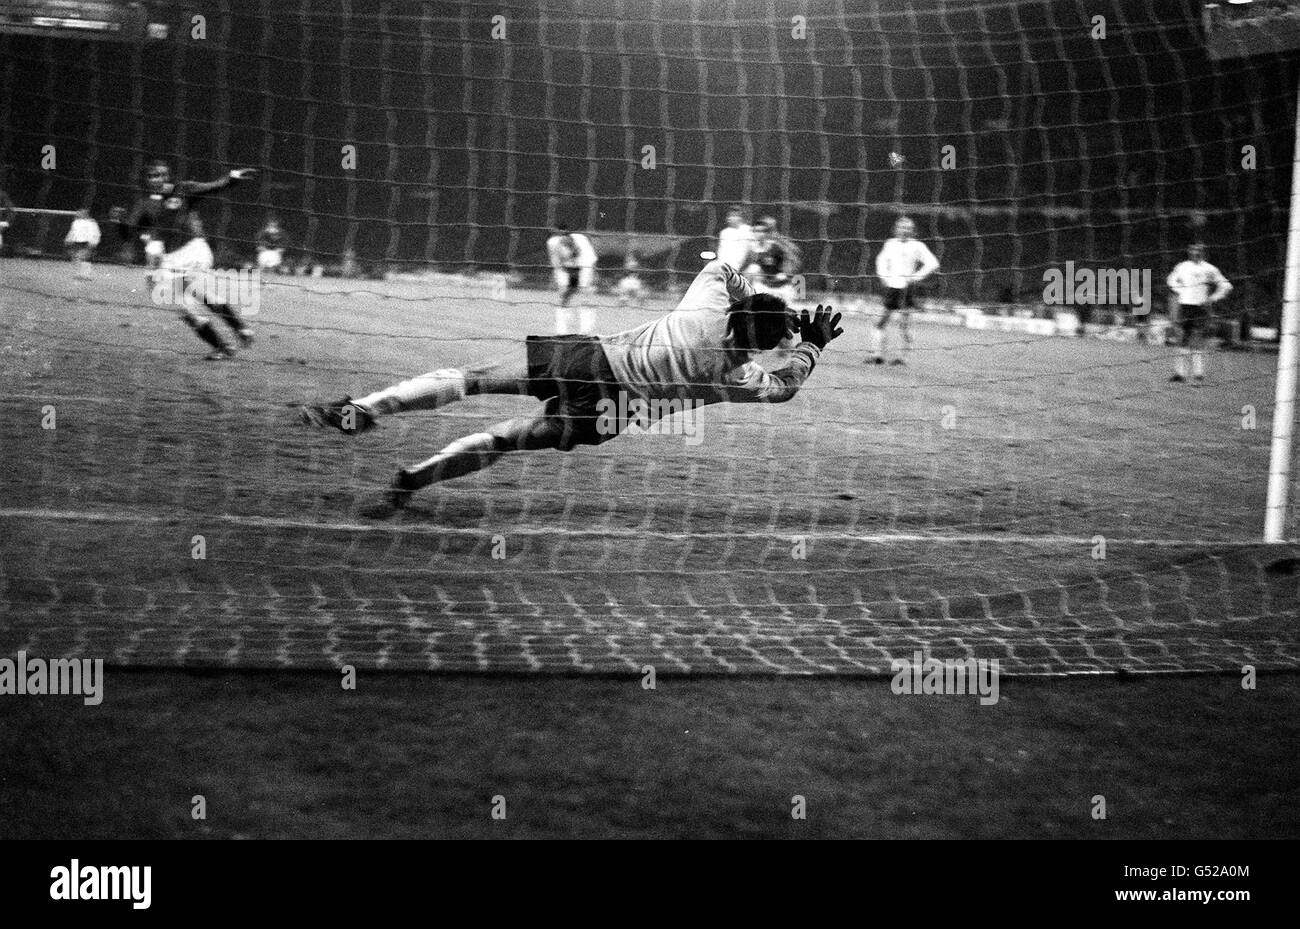 Gordon Banks, the England goalkeeper in a brilliant effort to stop a penalty shot from West Germany's Gunter Netzer in the 1971 European Championshp quarter-final (second leg) which Germany won 3-1. Stock Photo